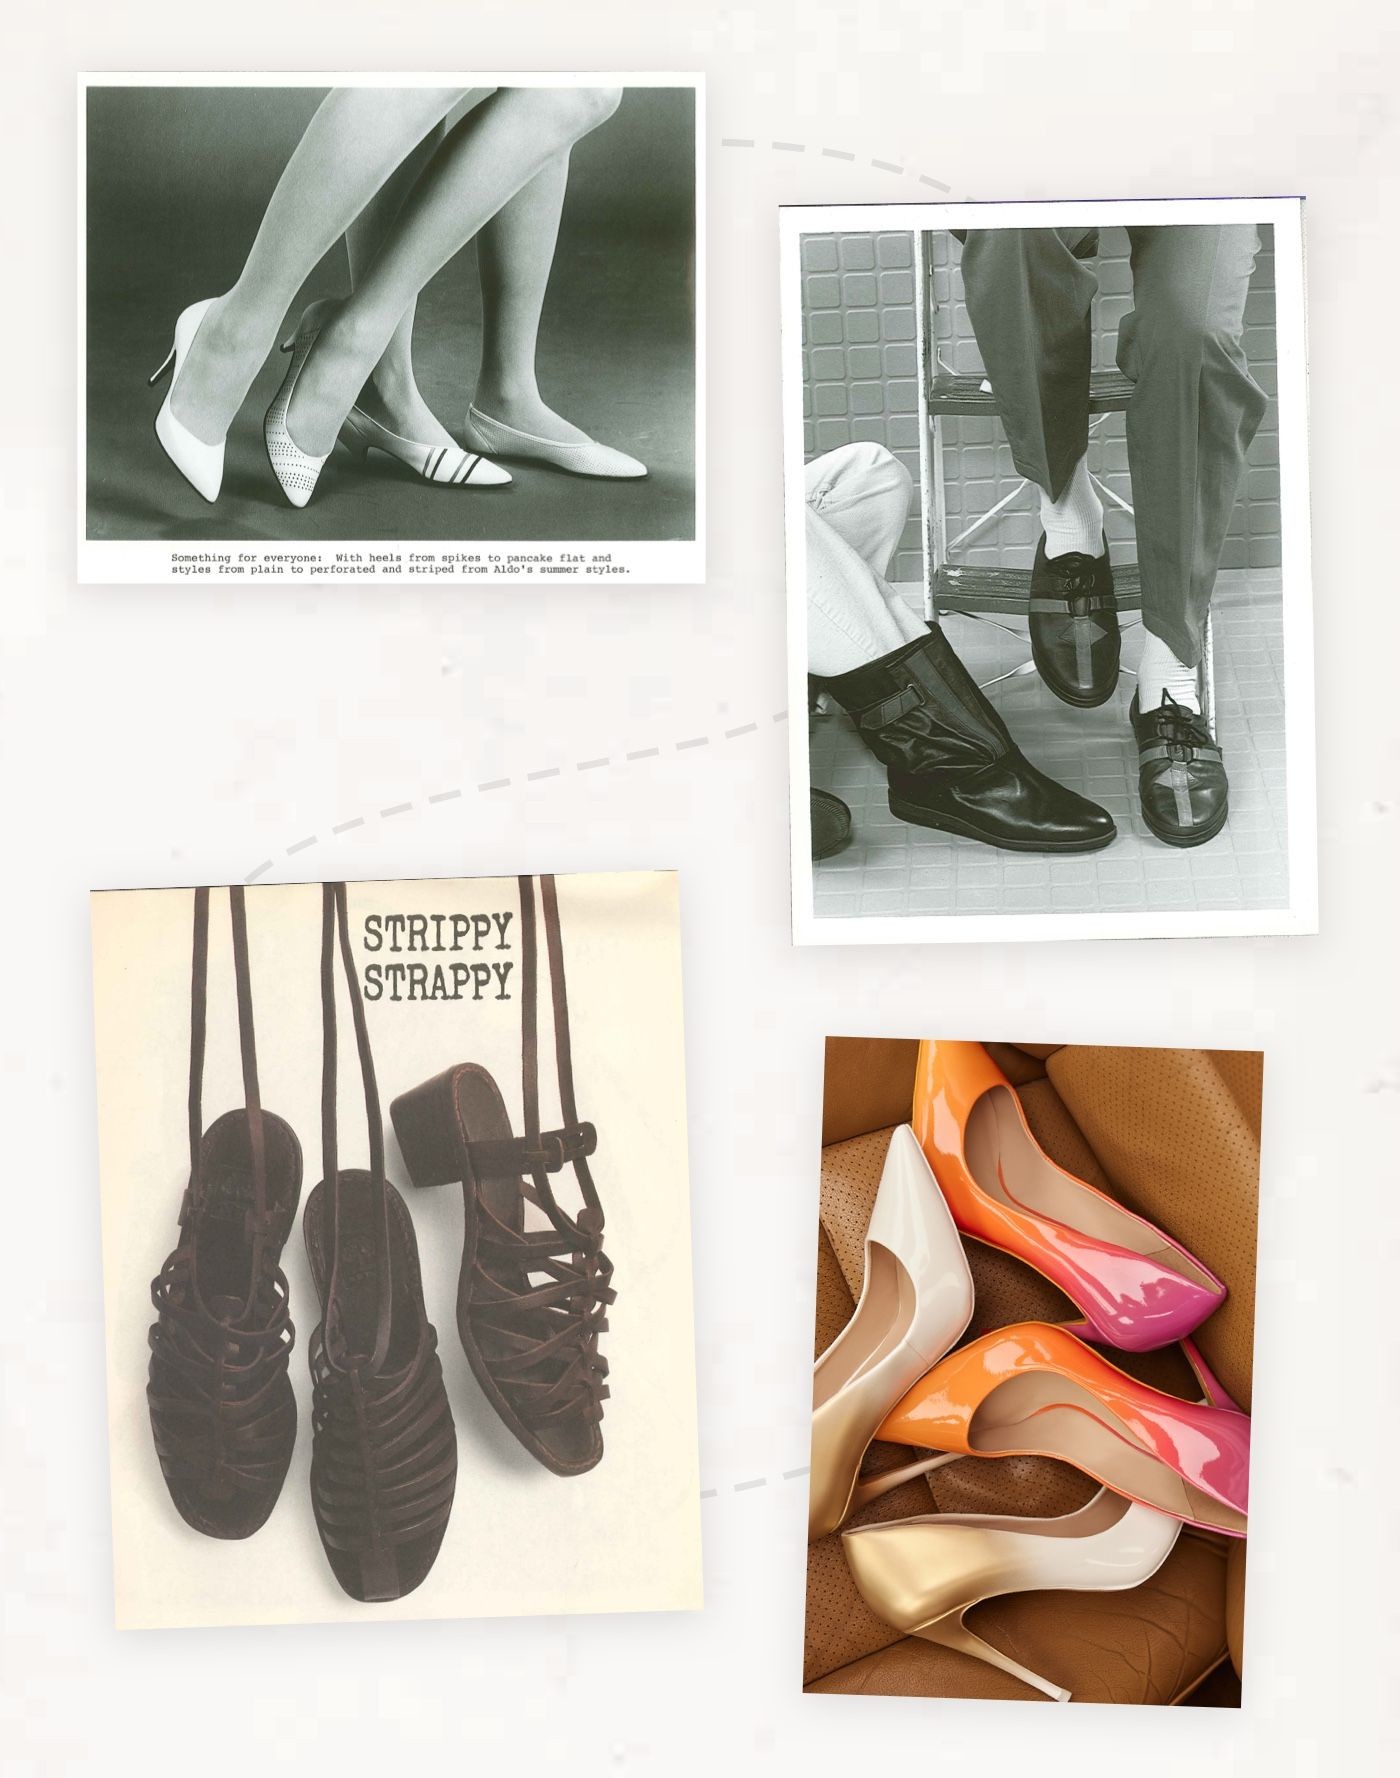 Chronology of aldo shoes with black and white images up to the present day